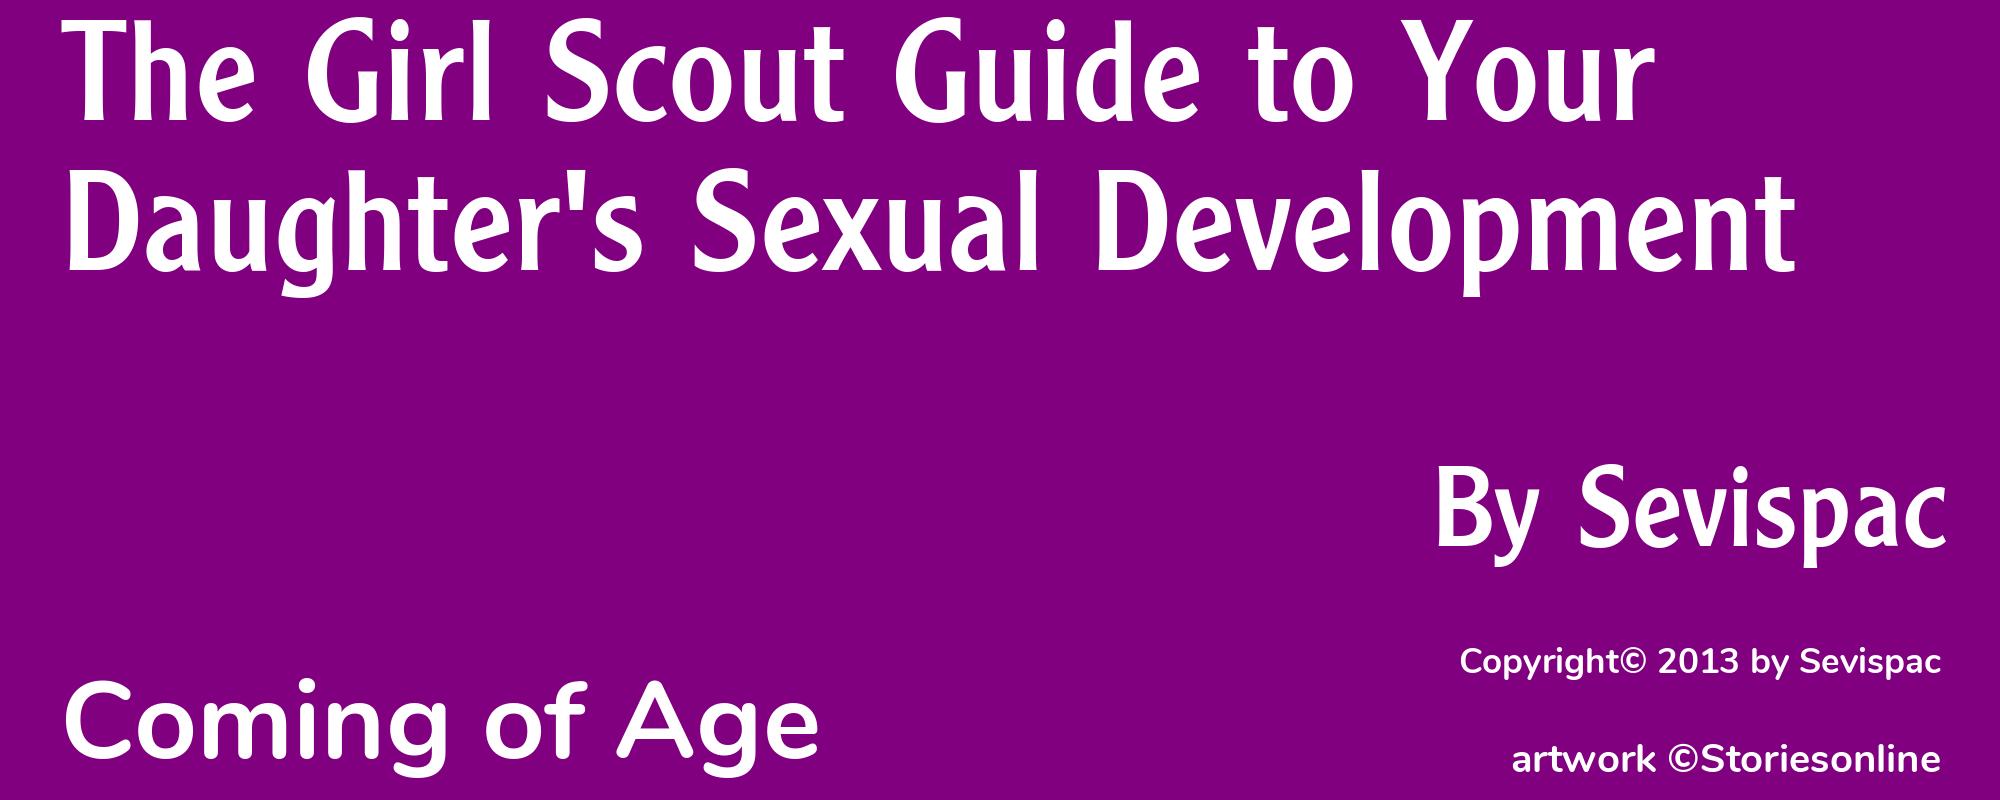 The Girl Scout Guide to Your Daughter's Sexual Development - Cover